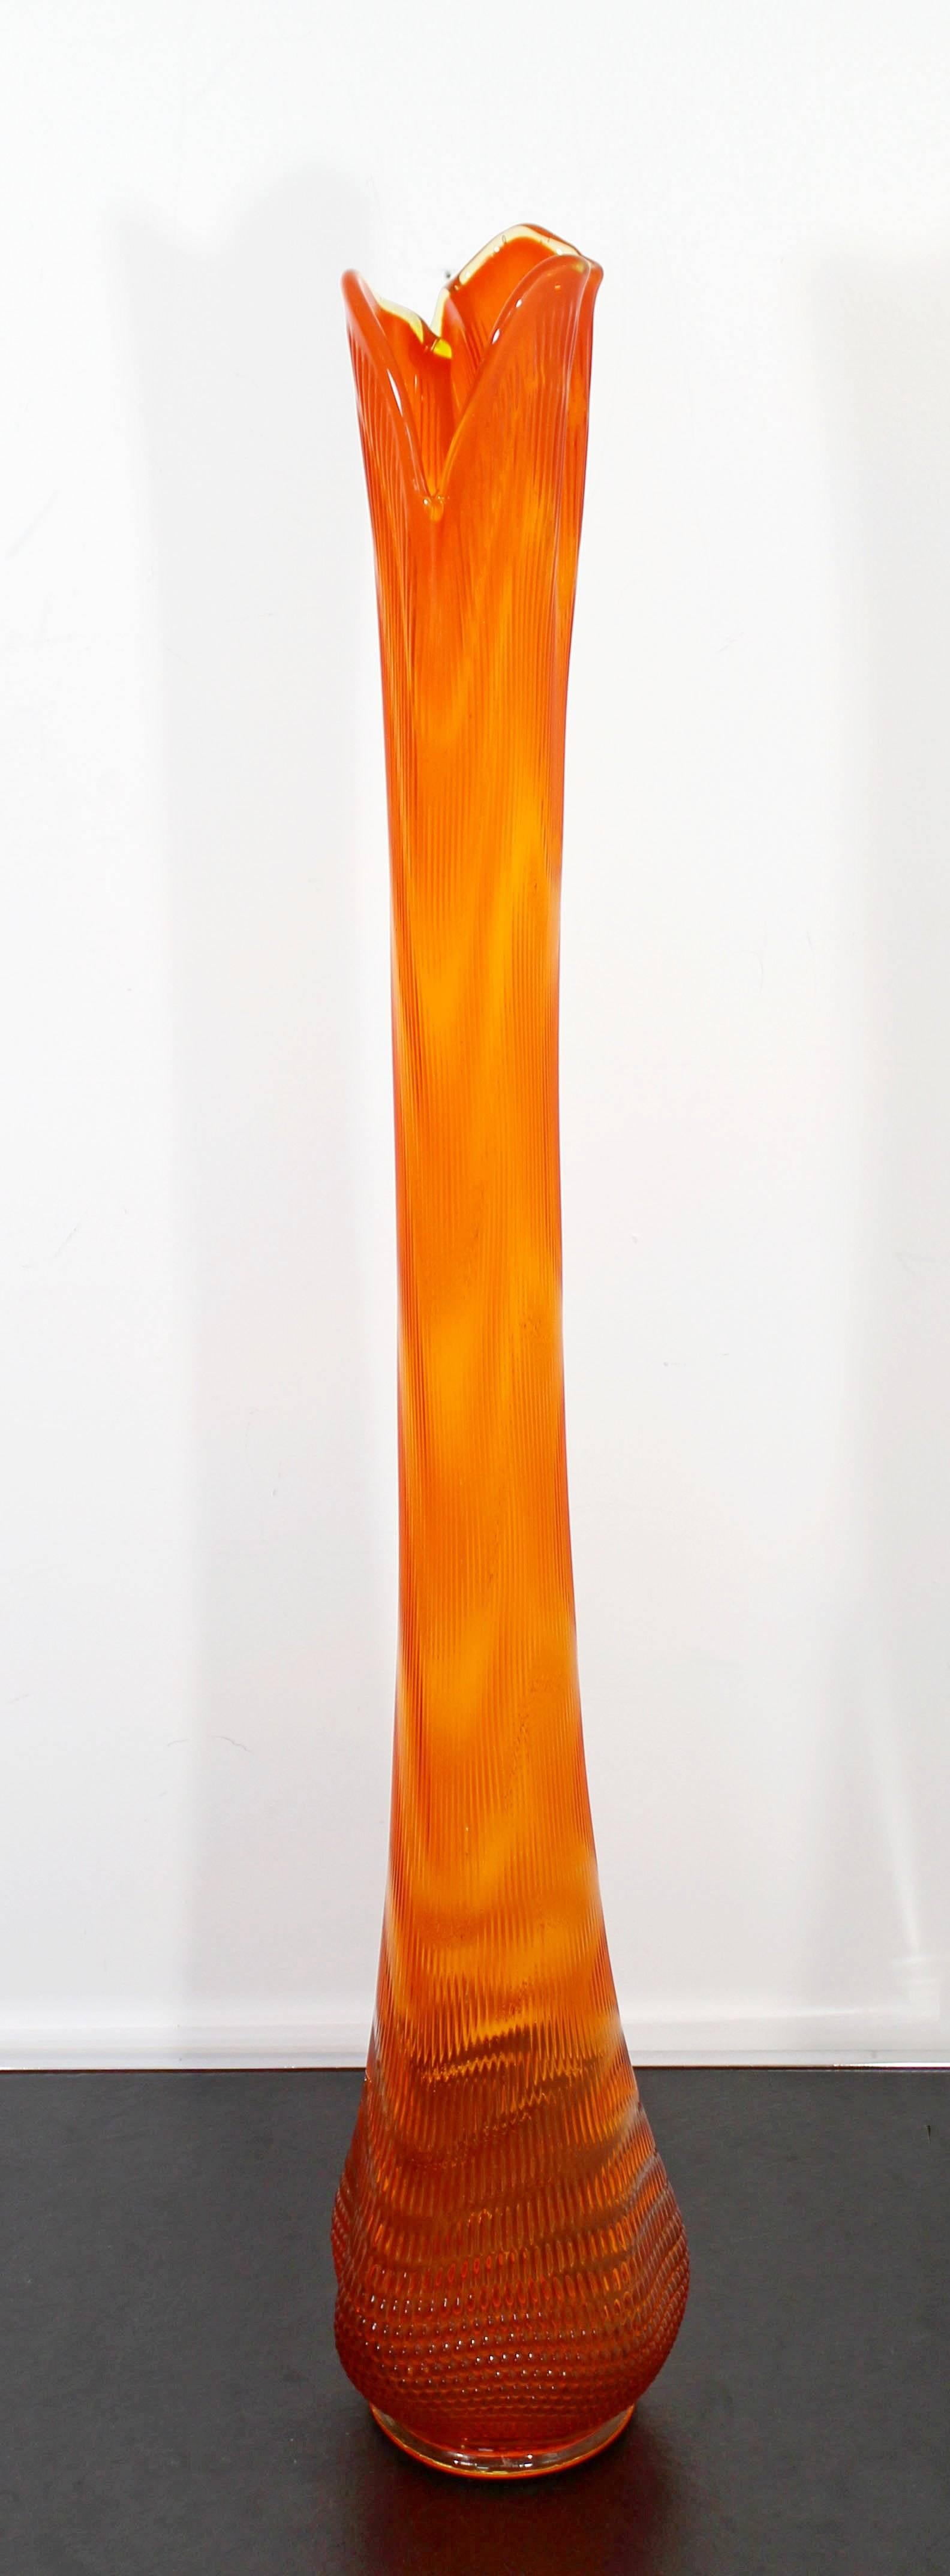 For your consideration is phenomenal, handblown orange viking glass, floor vase, circa the 1960s. In excellent condition. The dimensions are 8